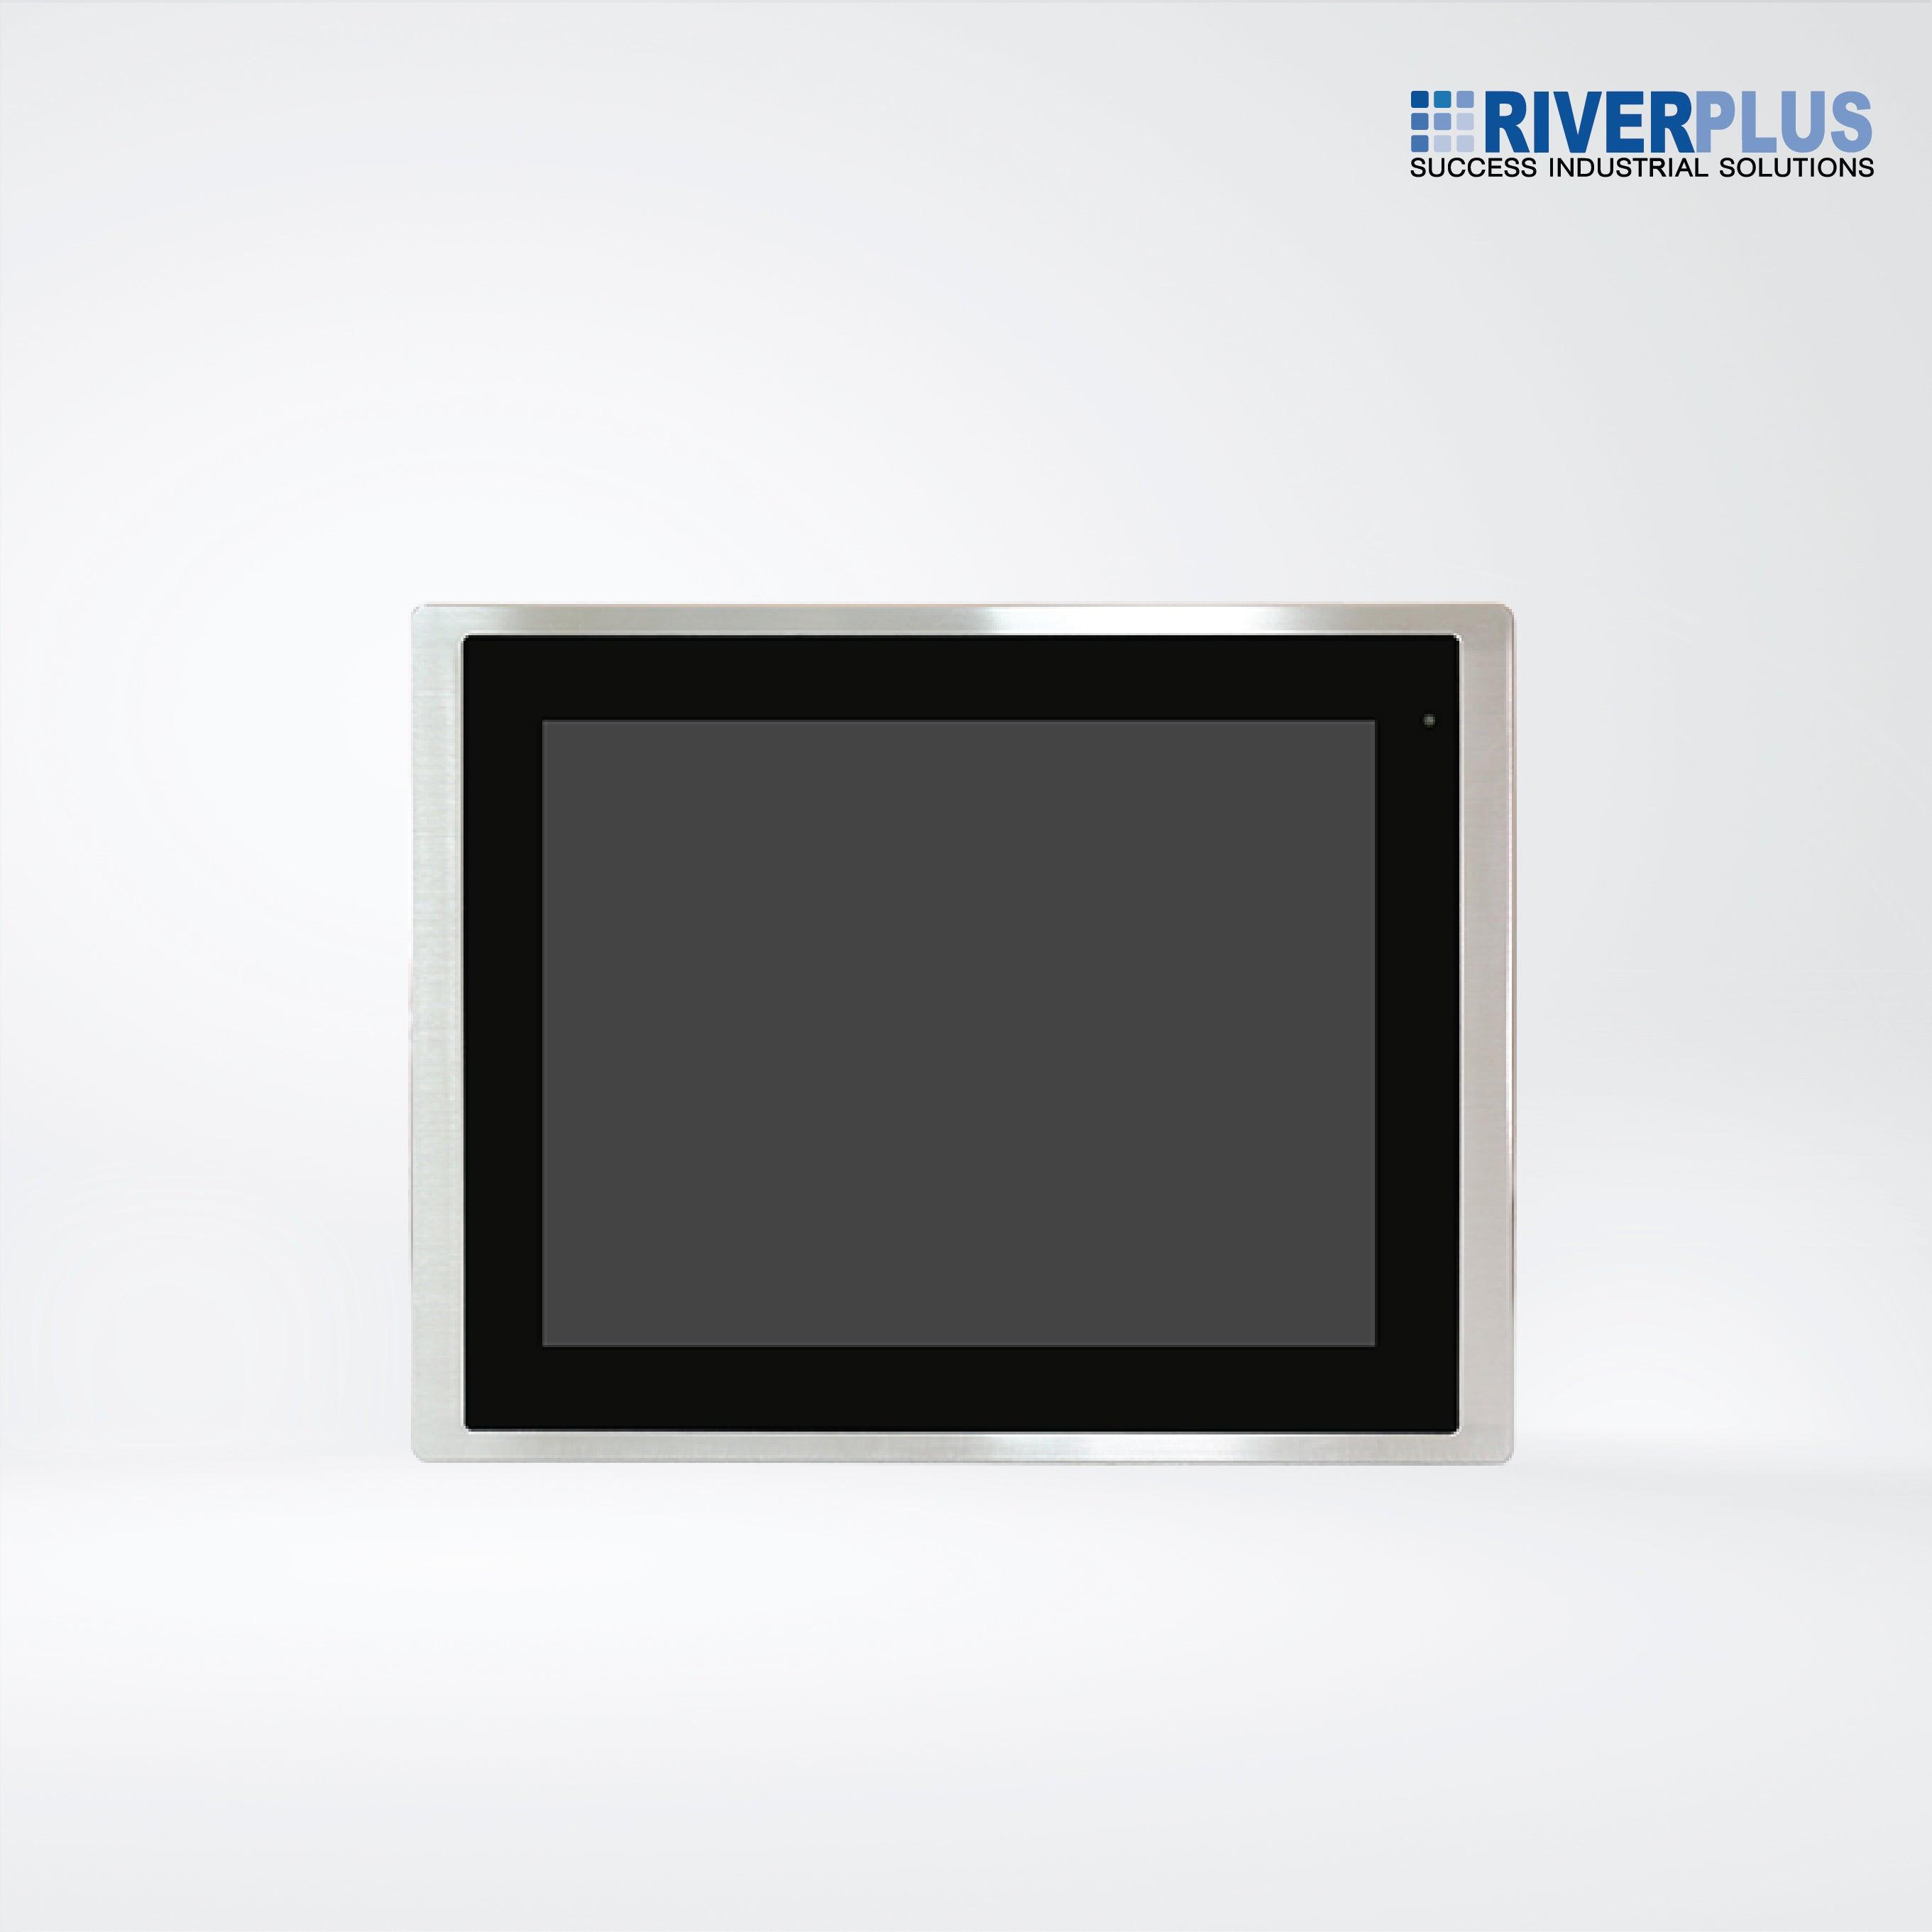 FABS-112P 12.1” Flat Front Panel IP66 Stainless Chassis Display - Riverplus